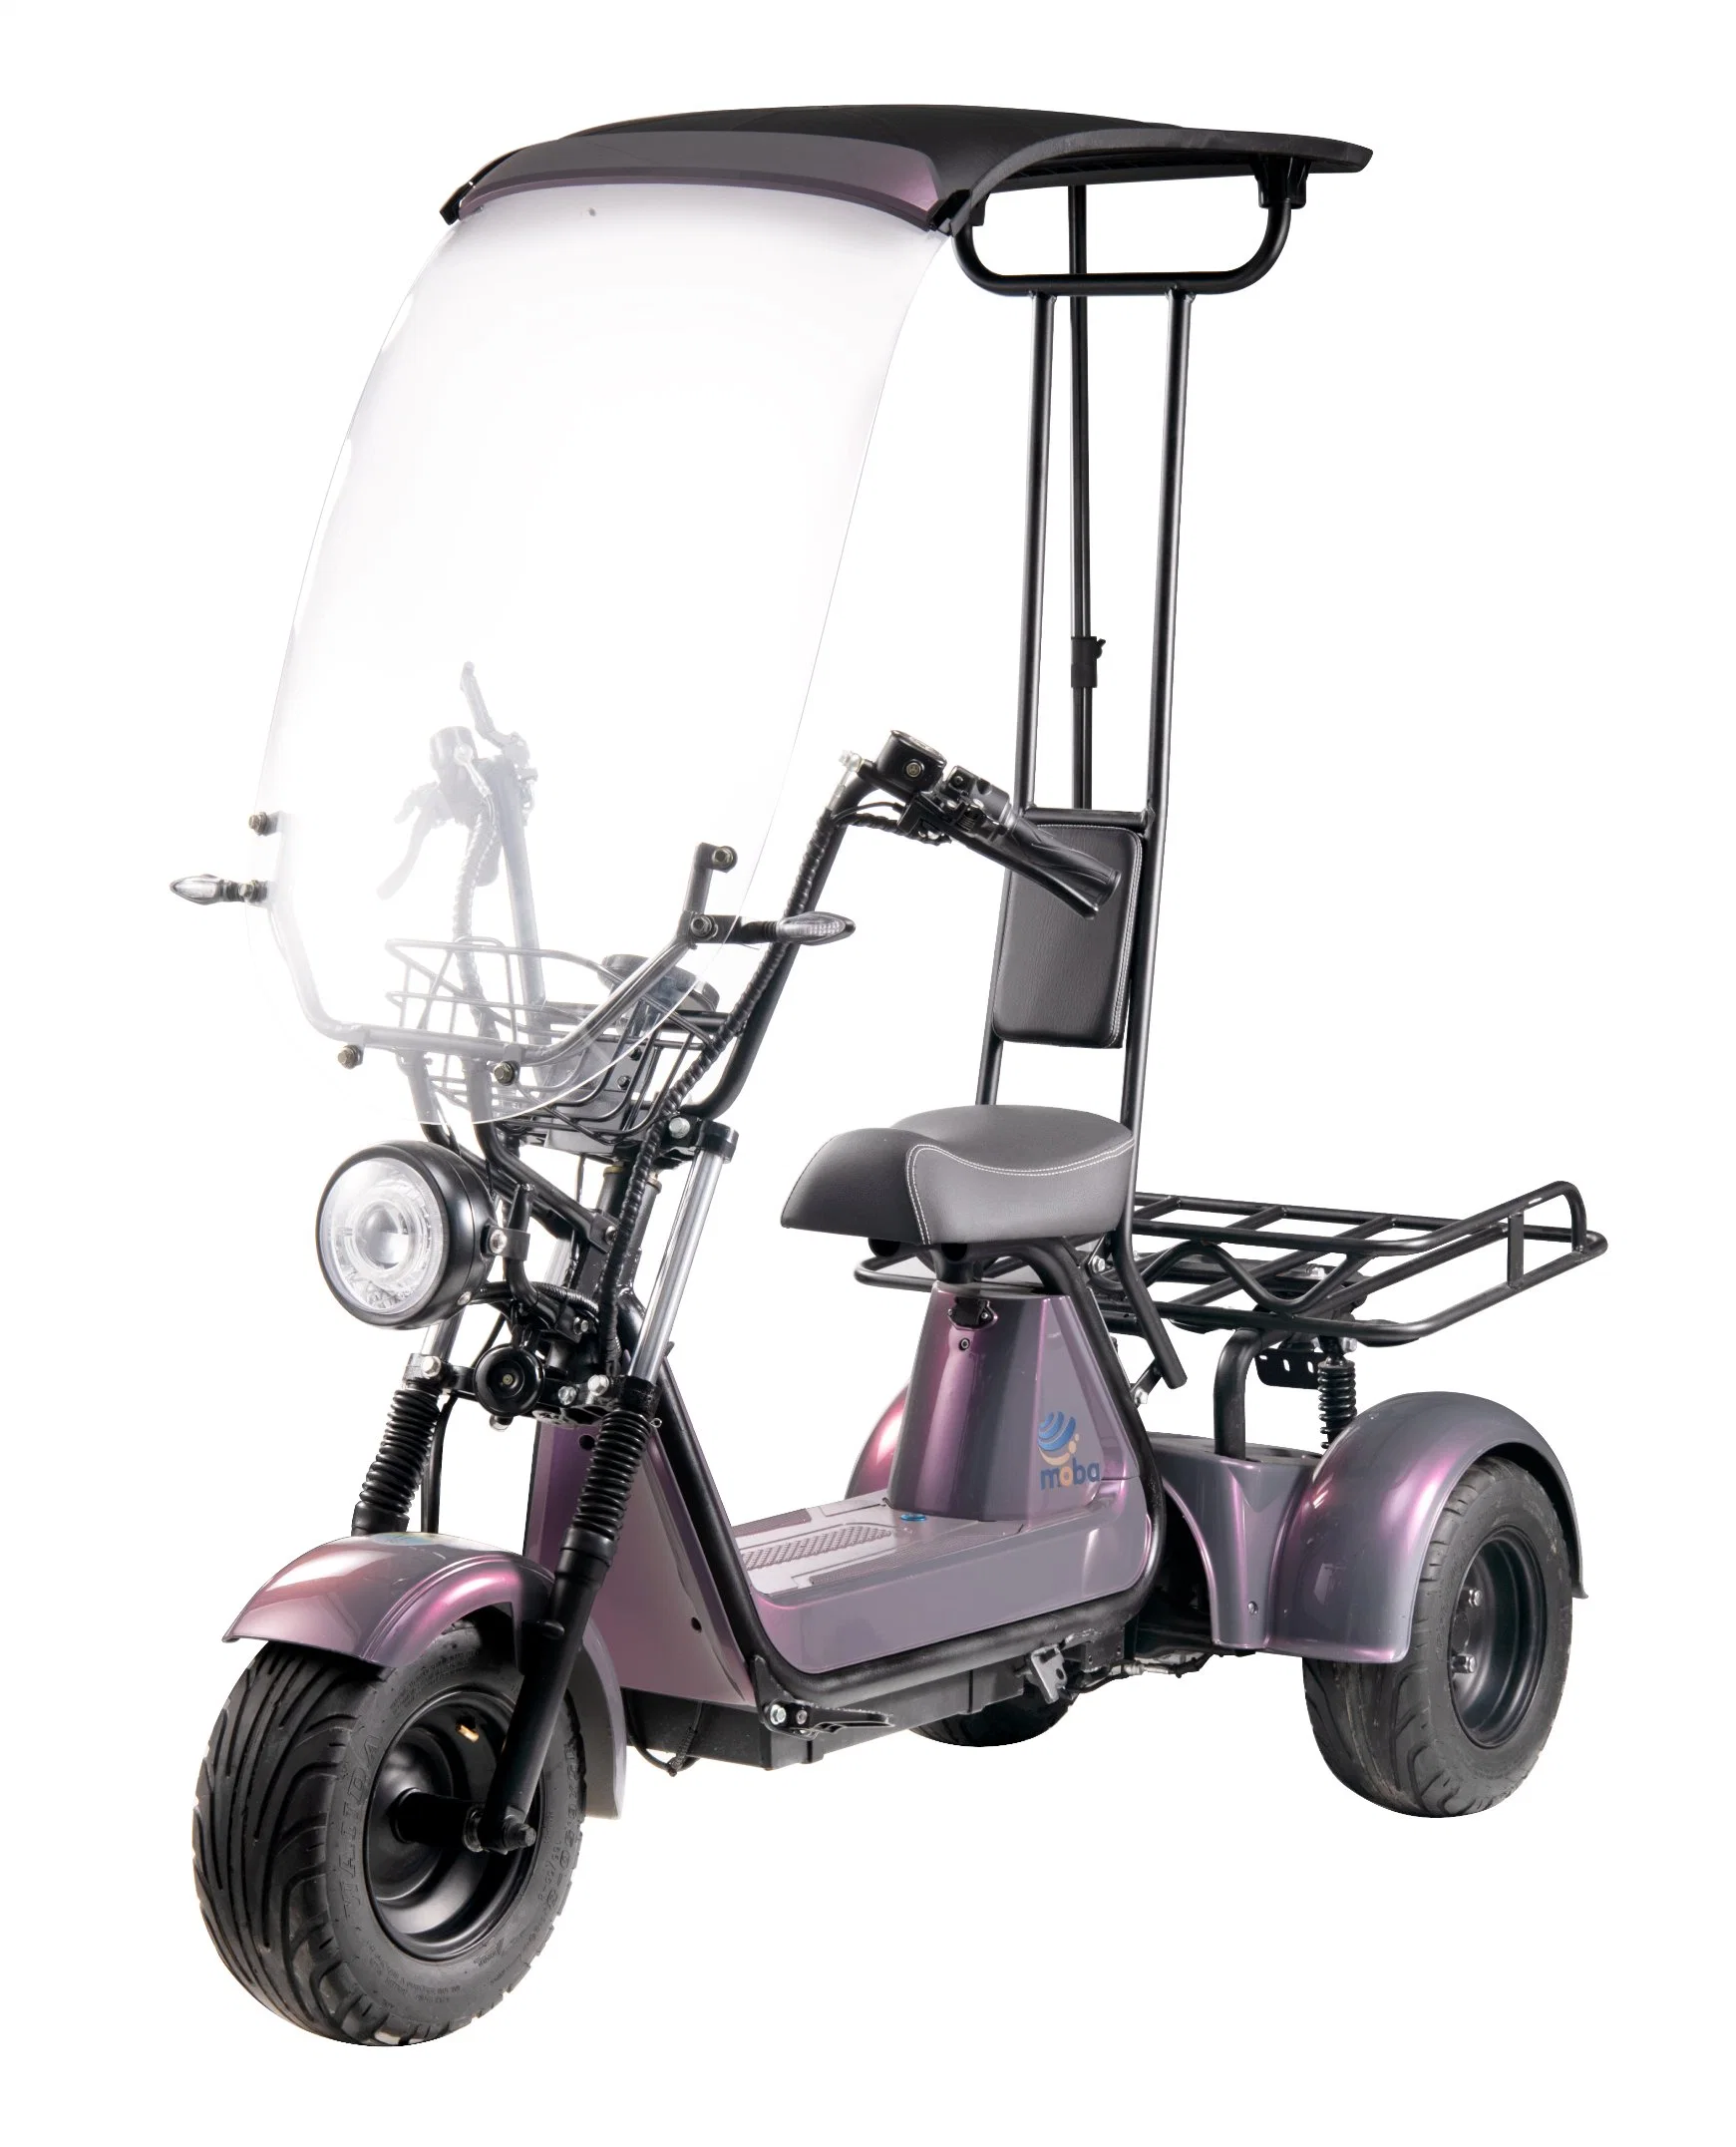 New Design 2000W Electric Tricycles 3 Wheel Electric Scooter Citycoco Trike Adult 40ah Big Battery Long Drive Range